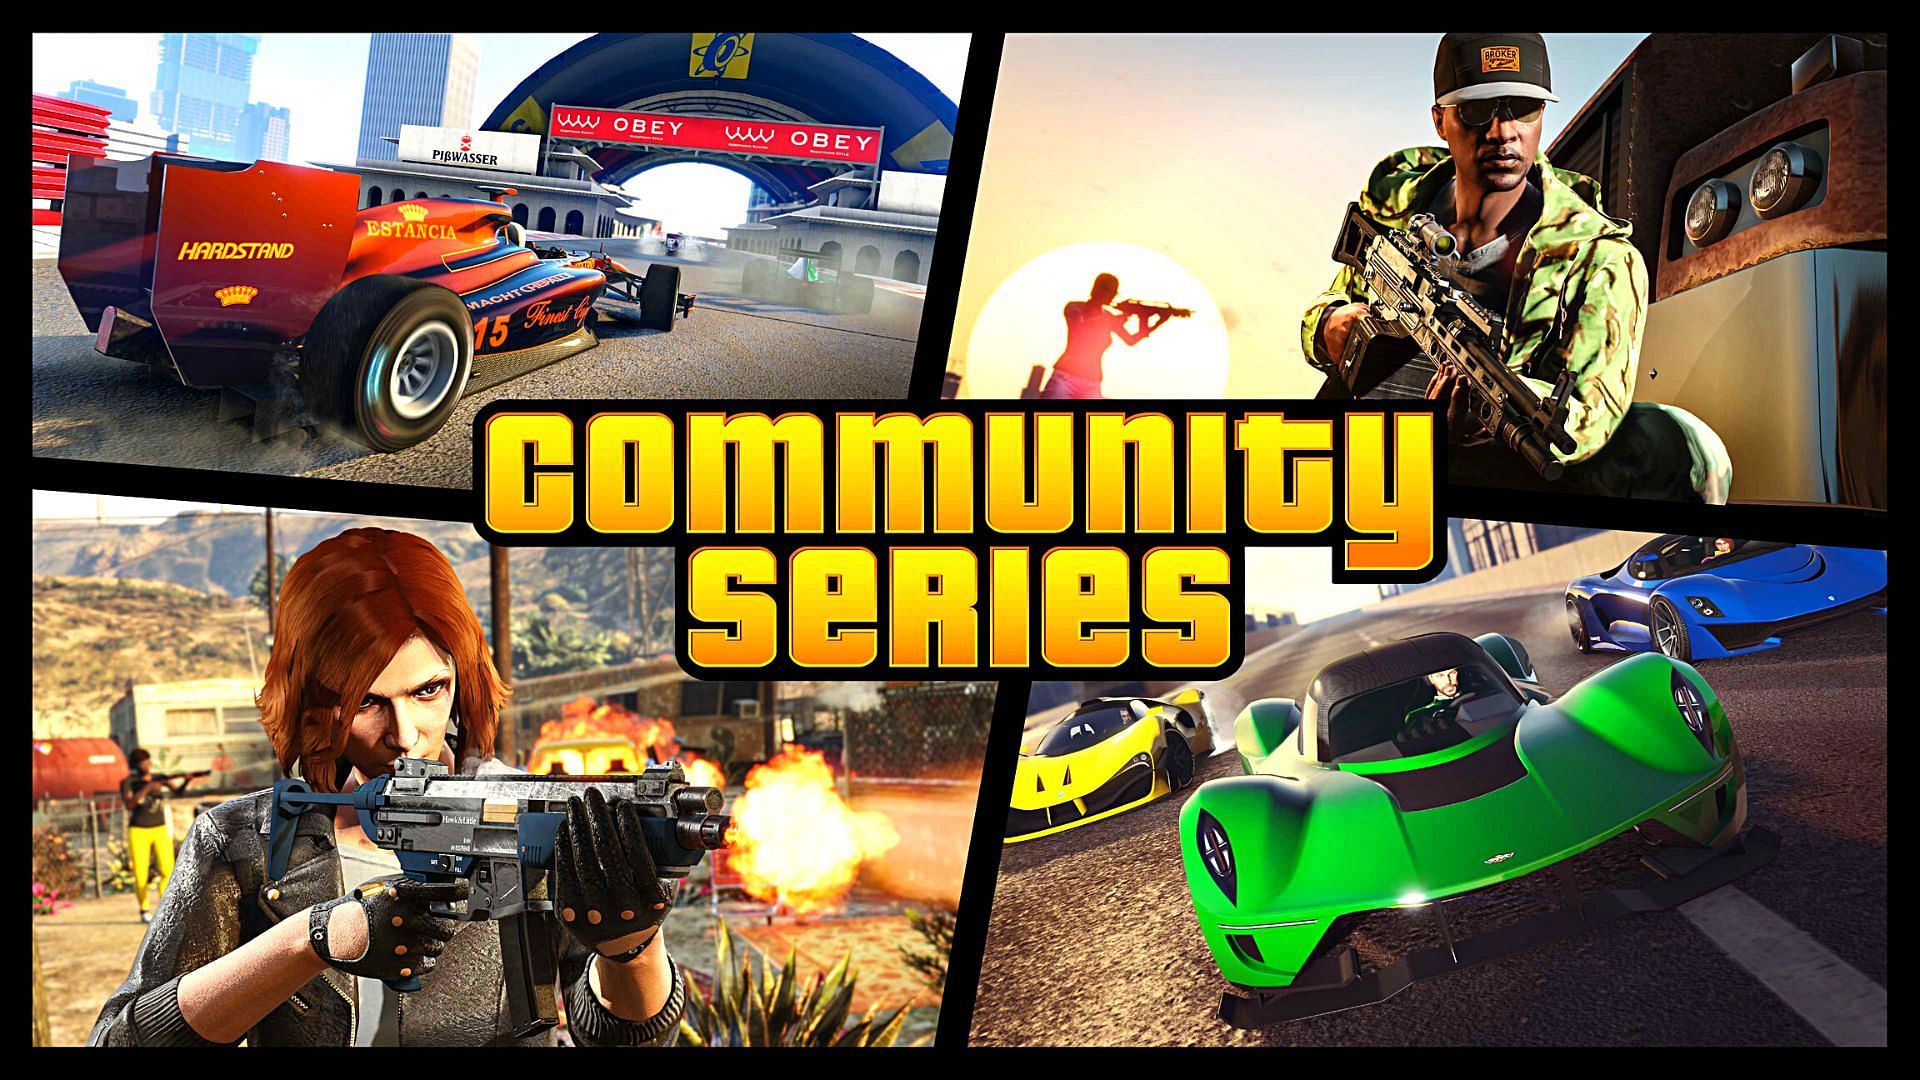 A brief about GTA Online Community Series with which players can earn double rewards this week (Image via Rockstar Games)